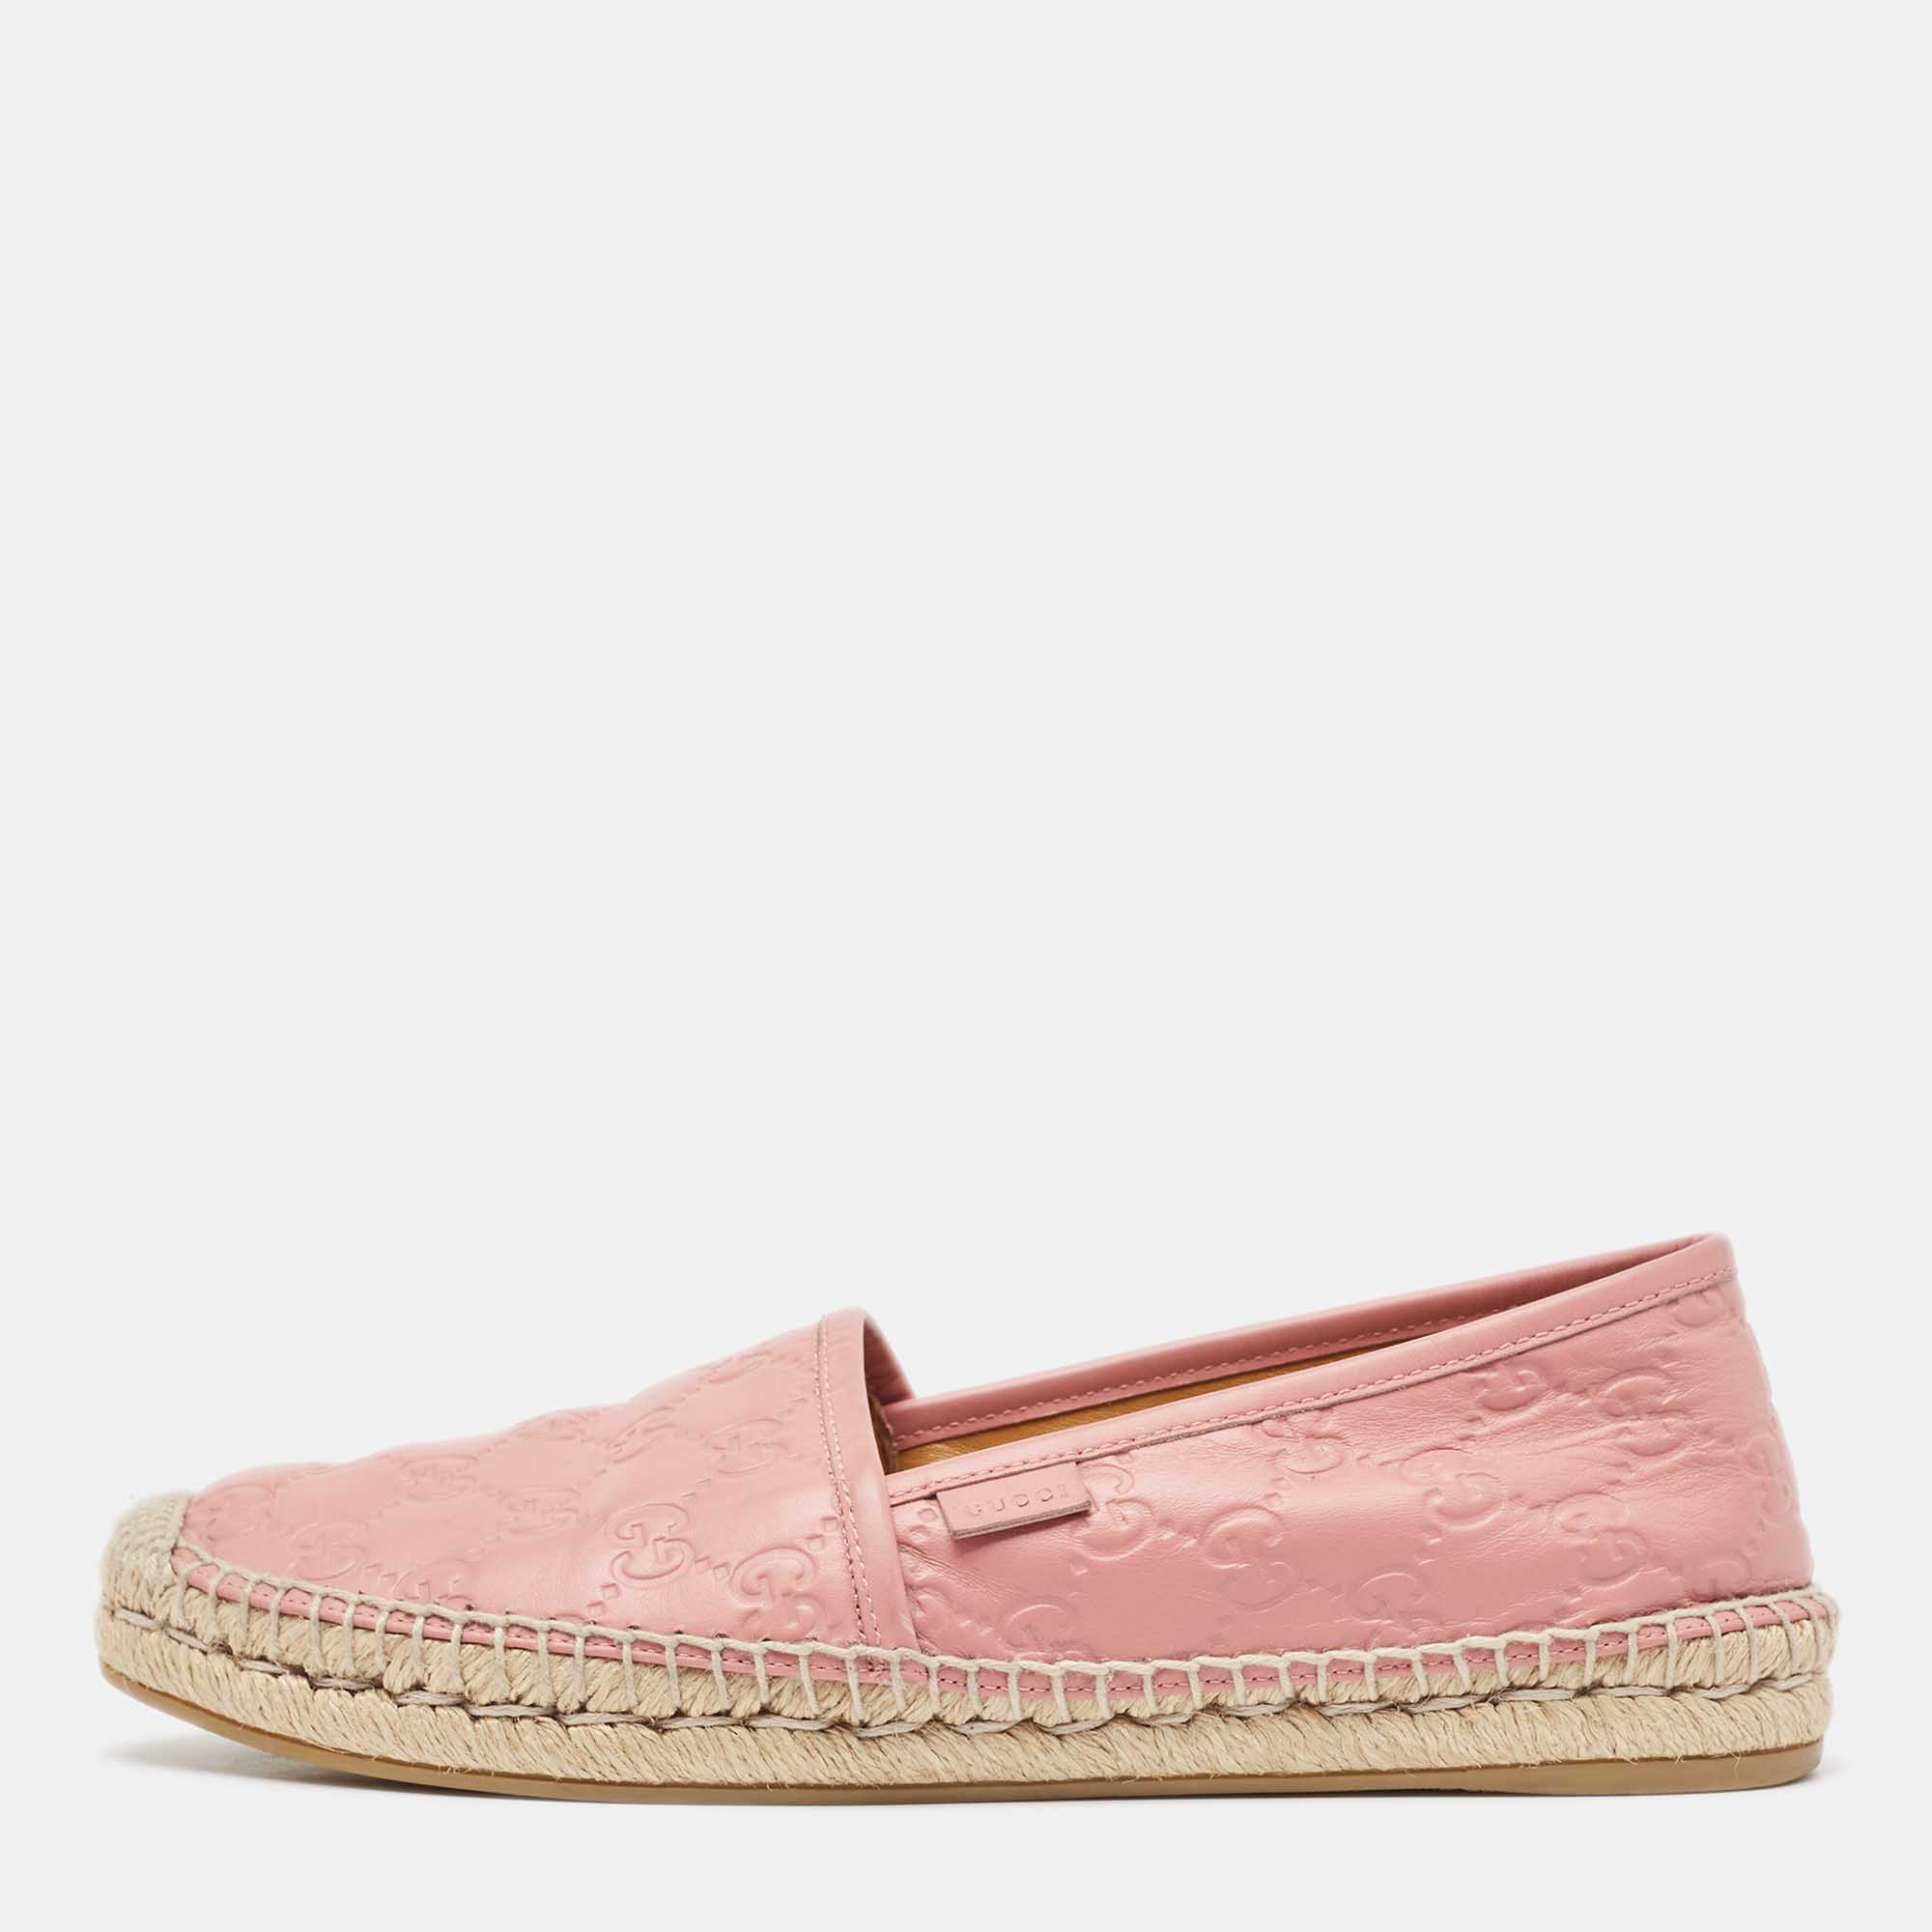 Pre-owned Gucci Pink Gg Leather Slip On Espadrilles Flats Size 39.5